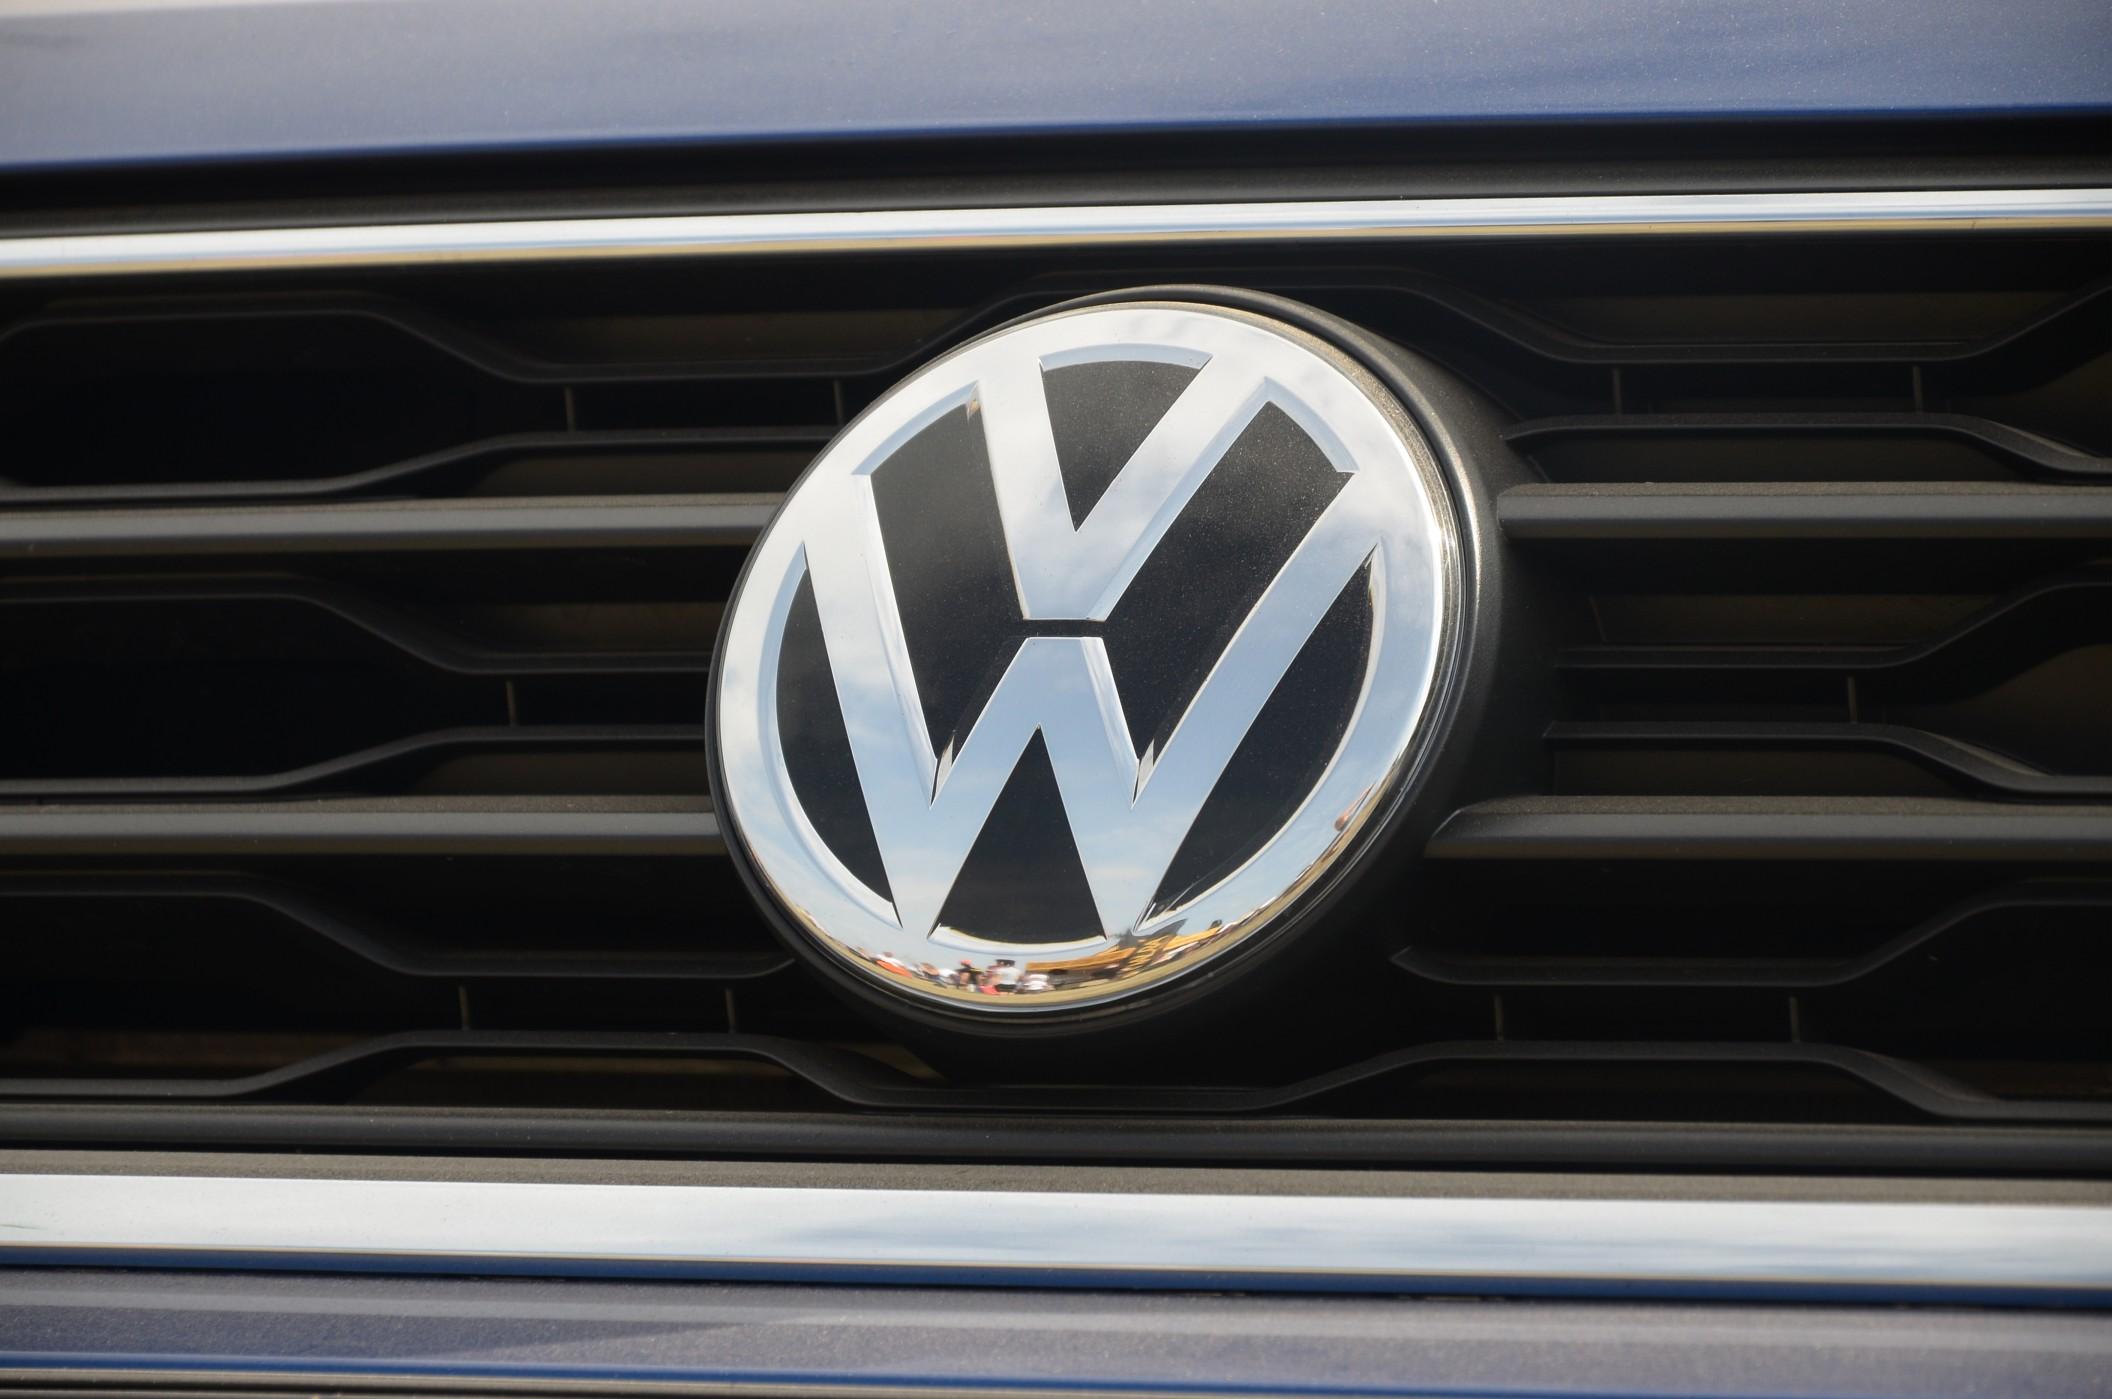 Certain Volkswagen models in Brazil will be sold without infotainment systems.